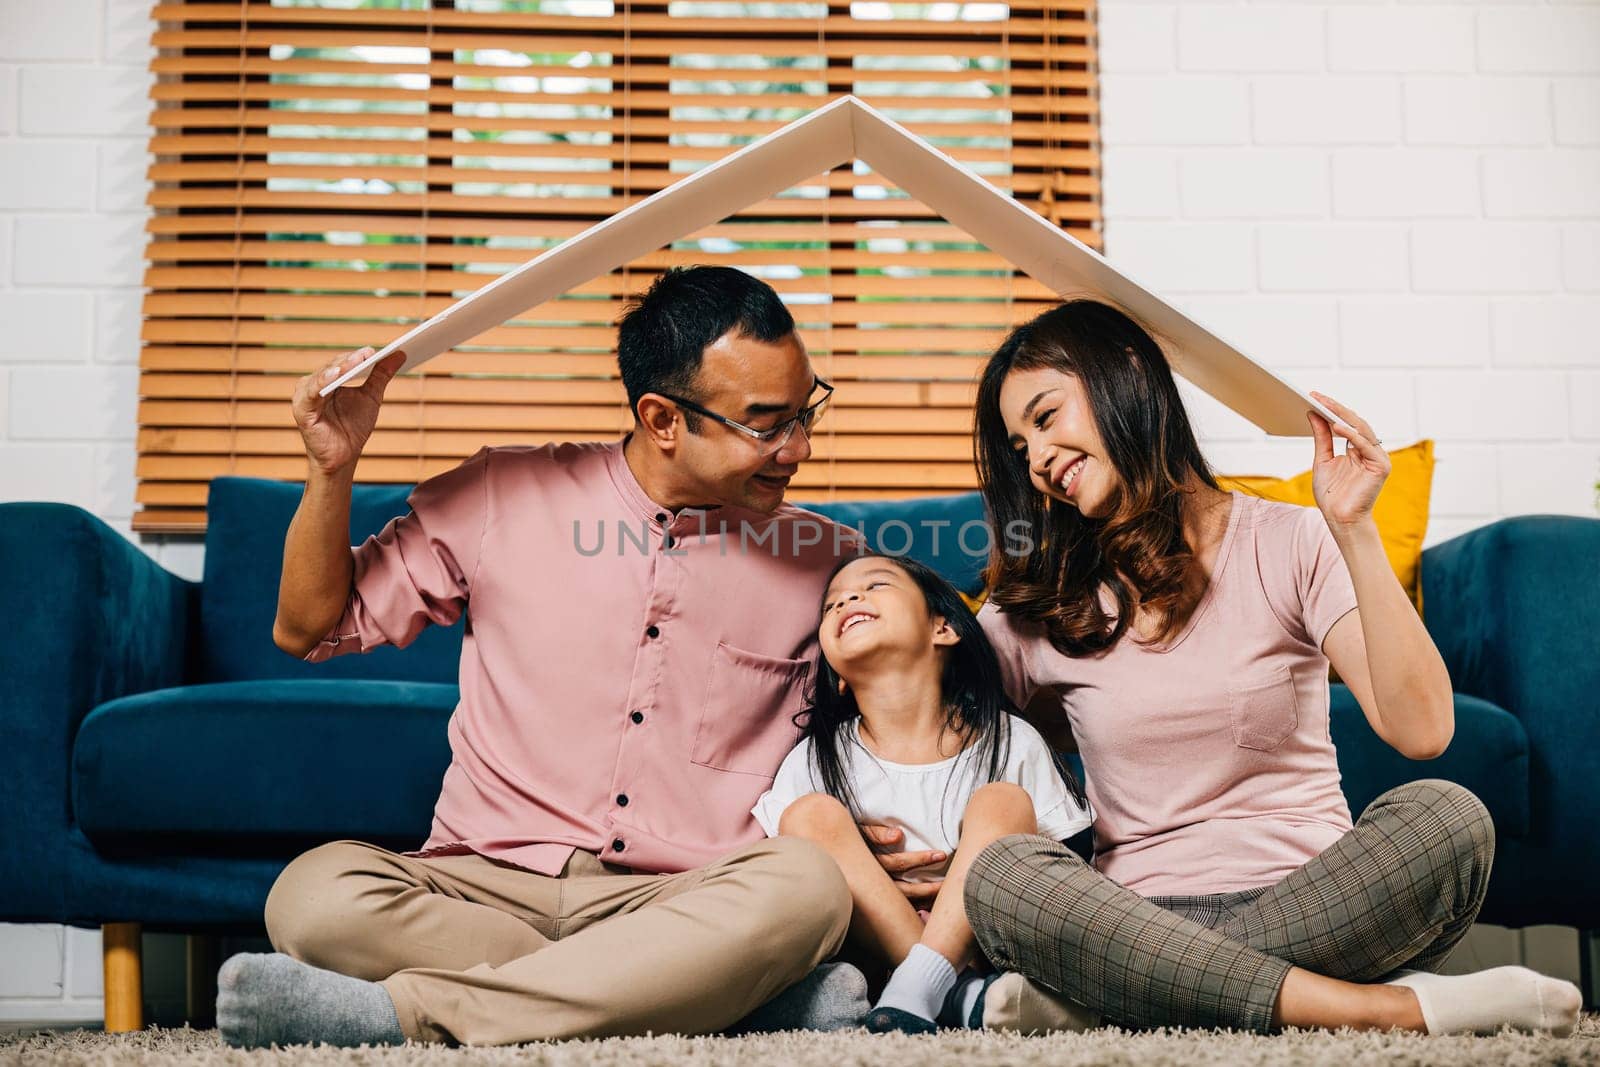 A portrait of a harmonious family sitting on a couch holding a cardboard roof by Sorapop